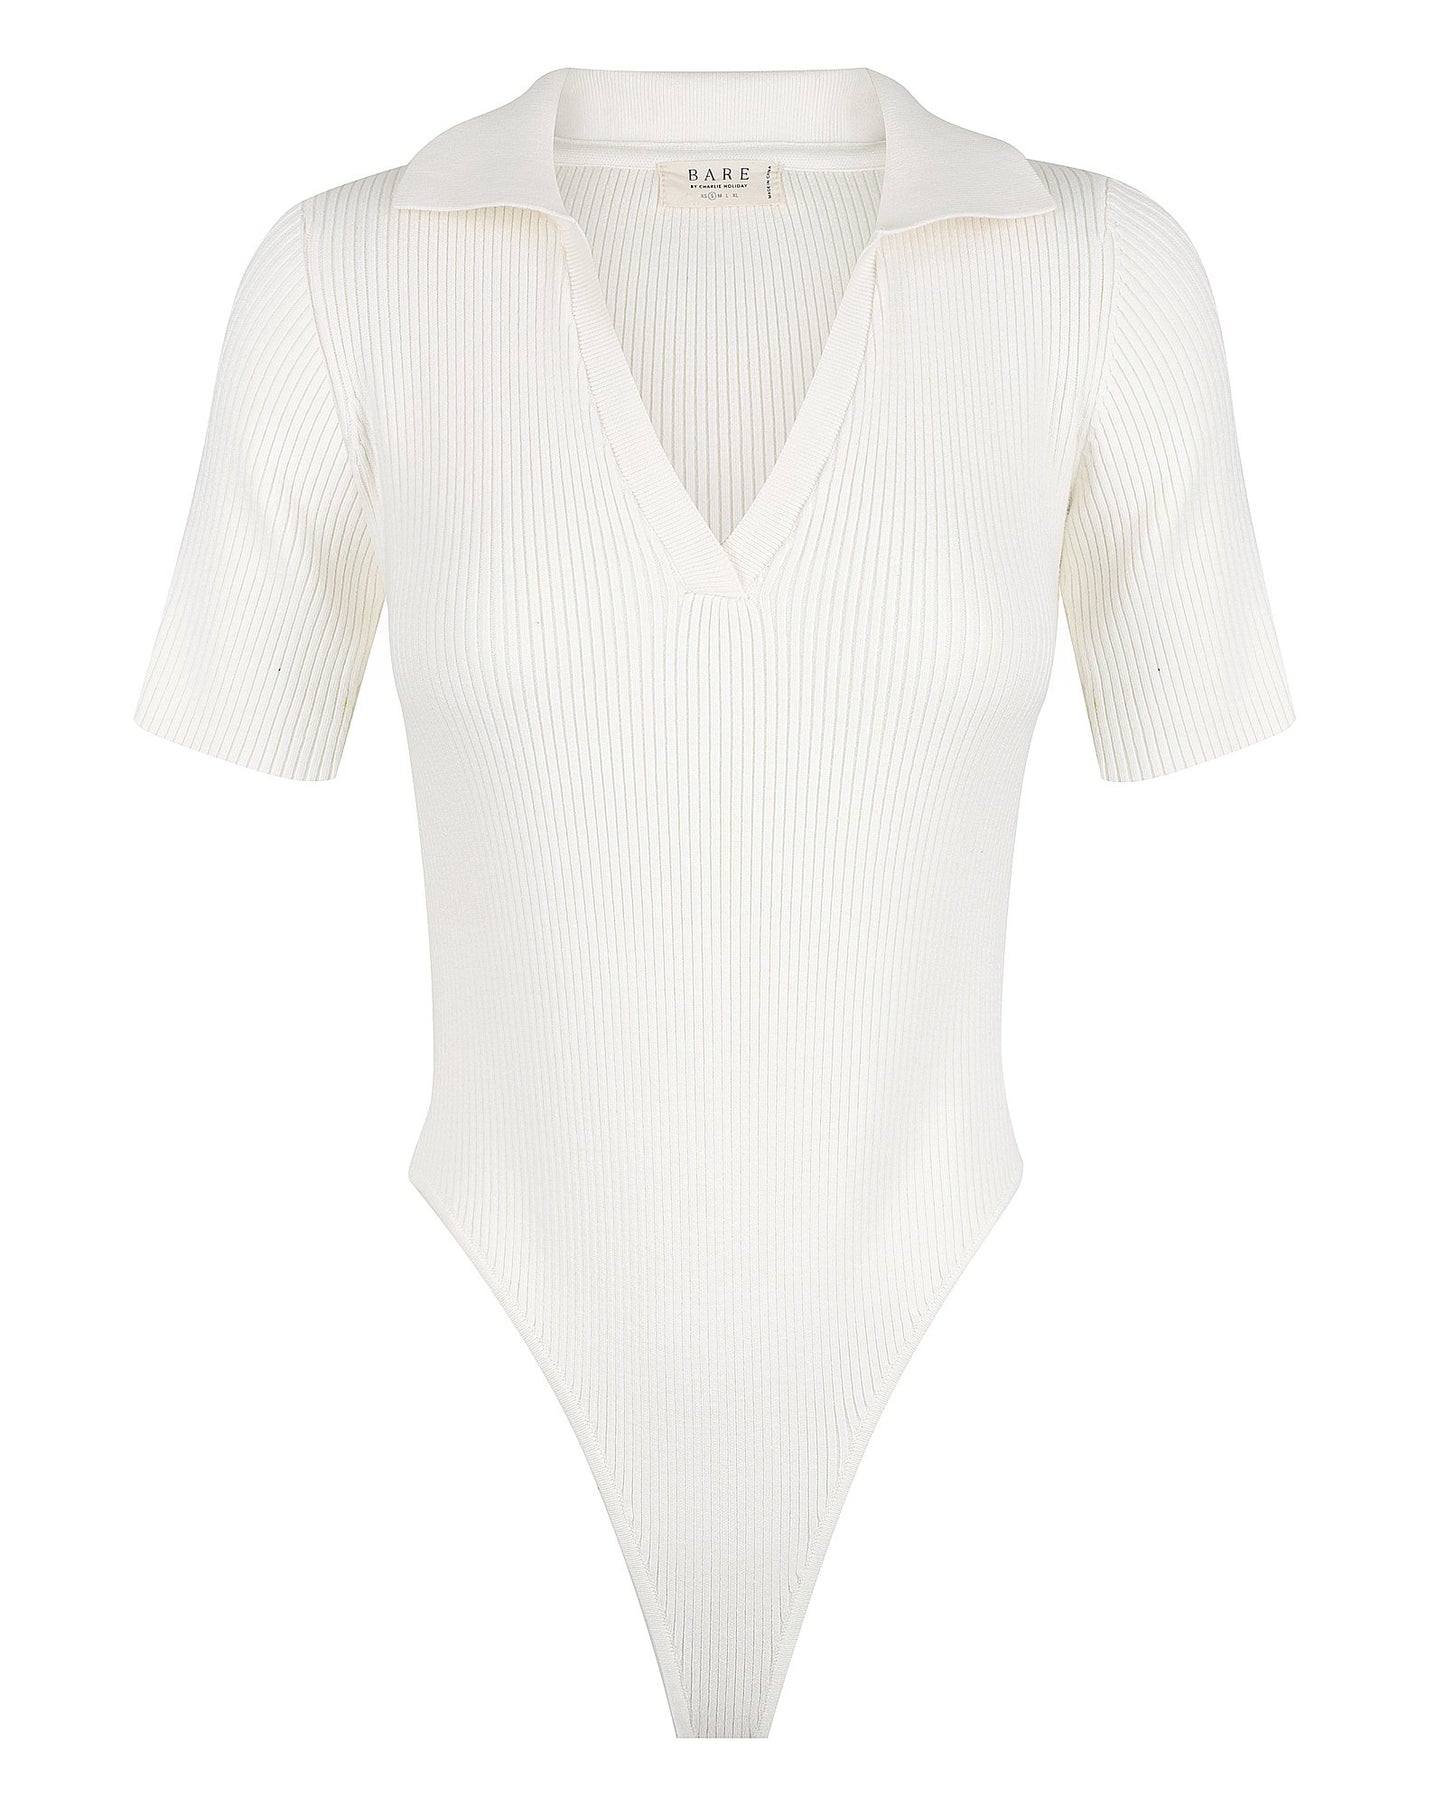 CHARLIE HOLIDAY BARE  //  Ribbed Knit Bodysuit COCONUT MILK